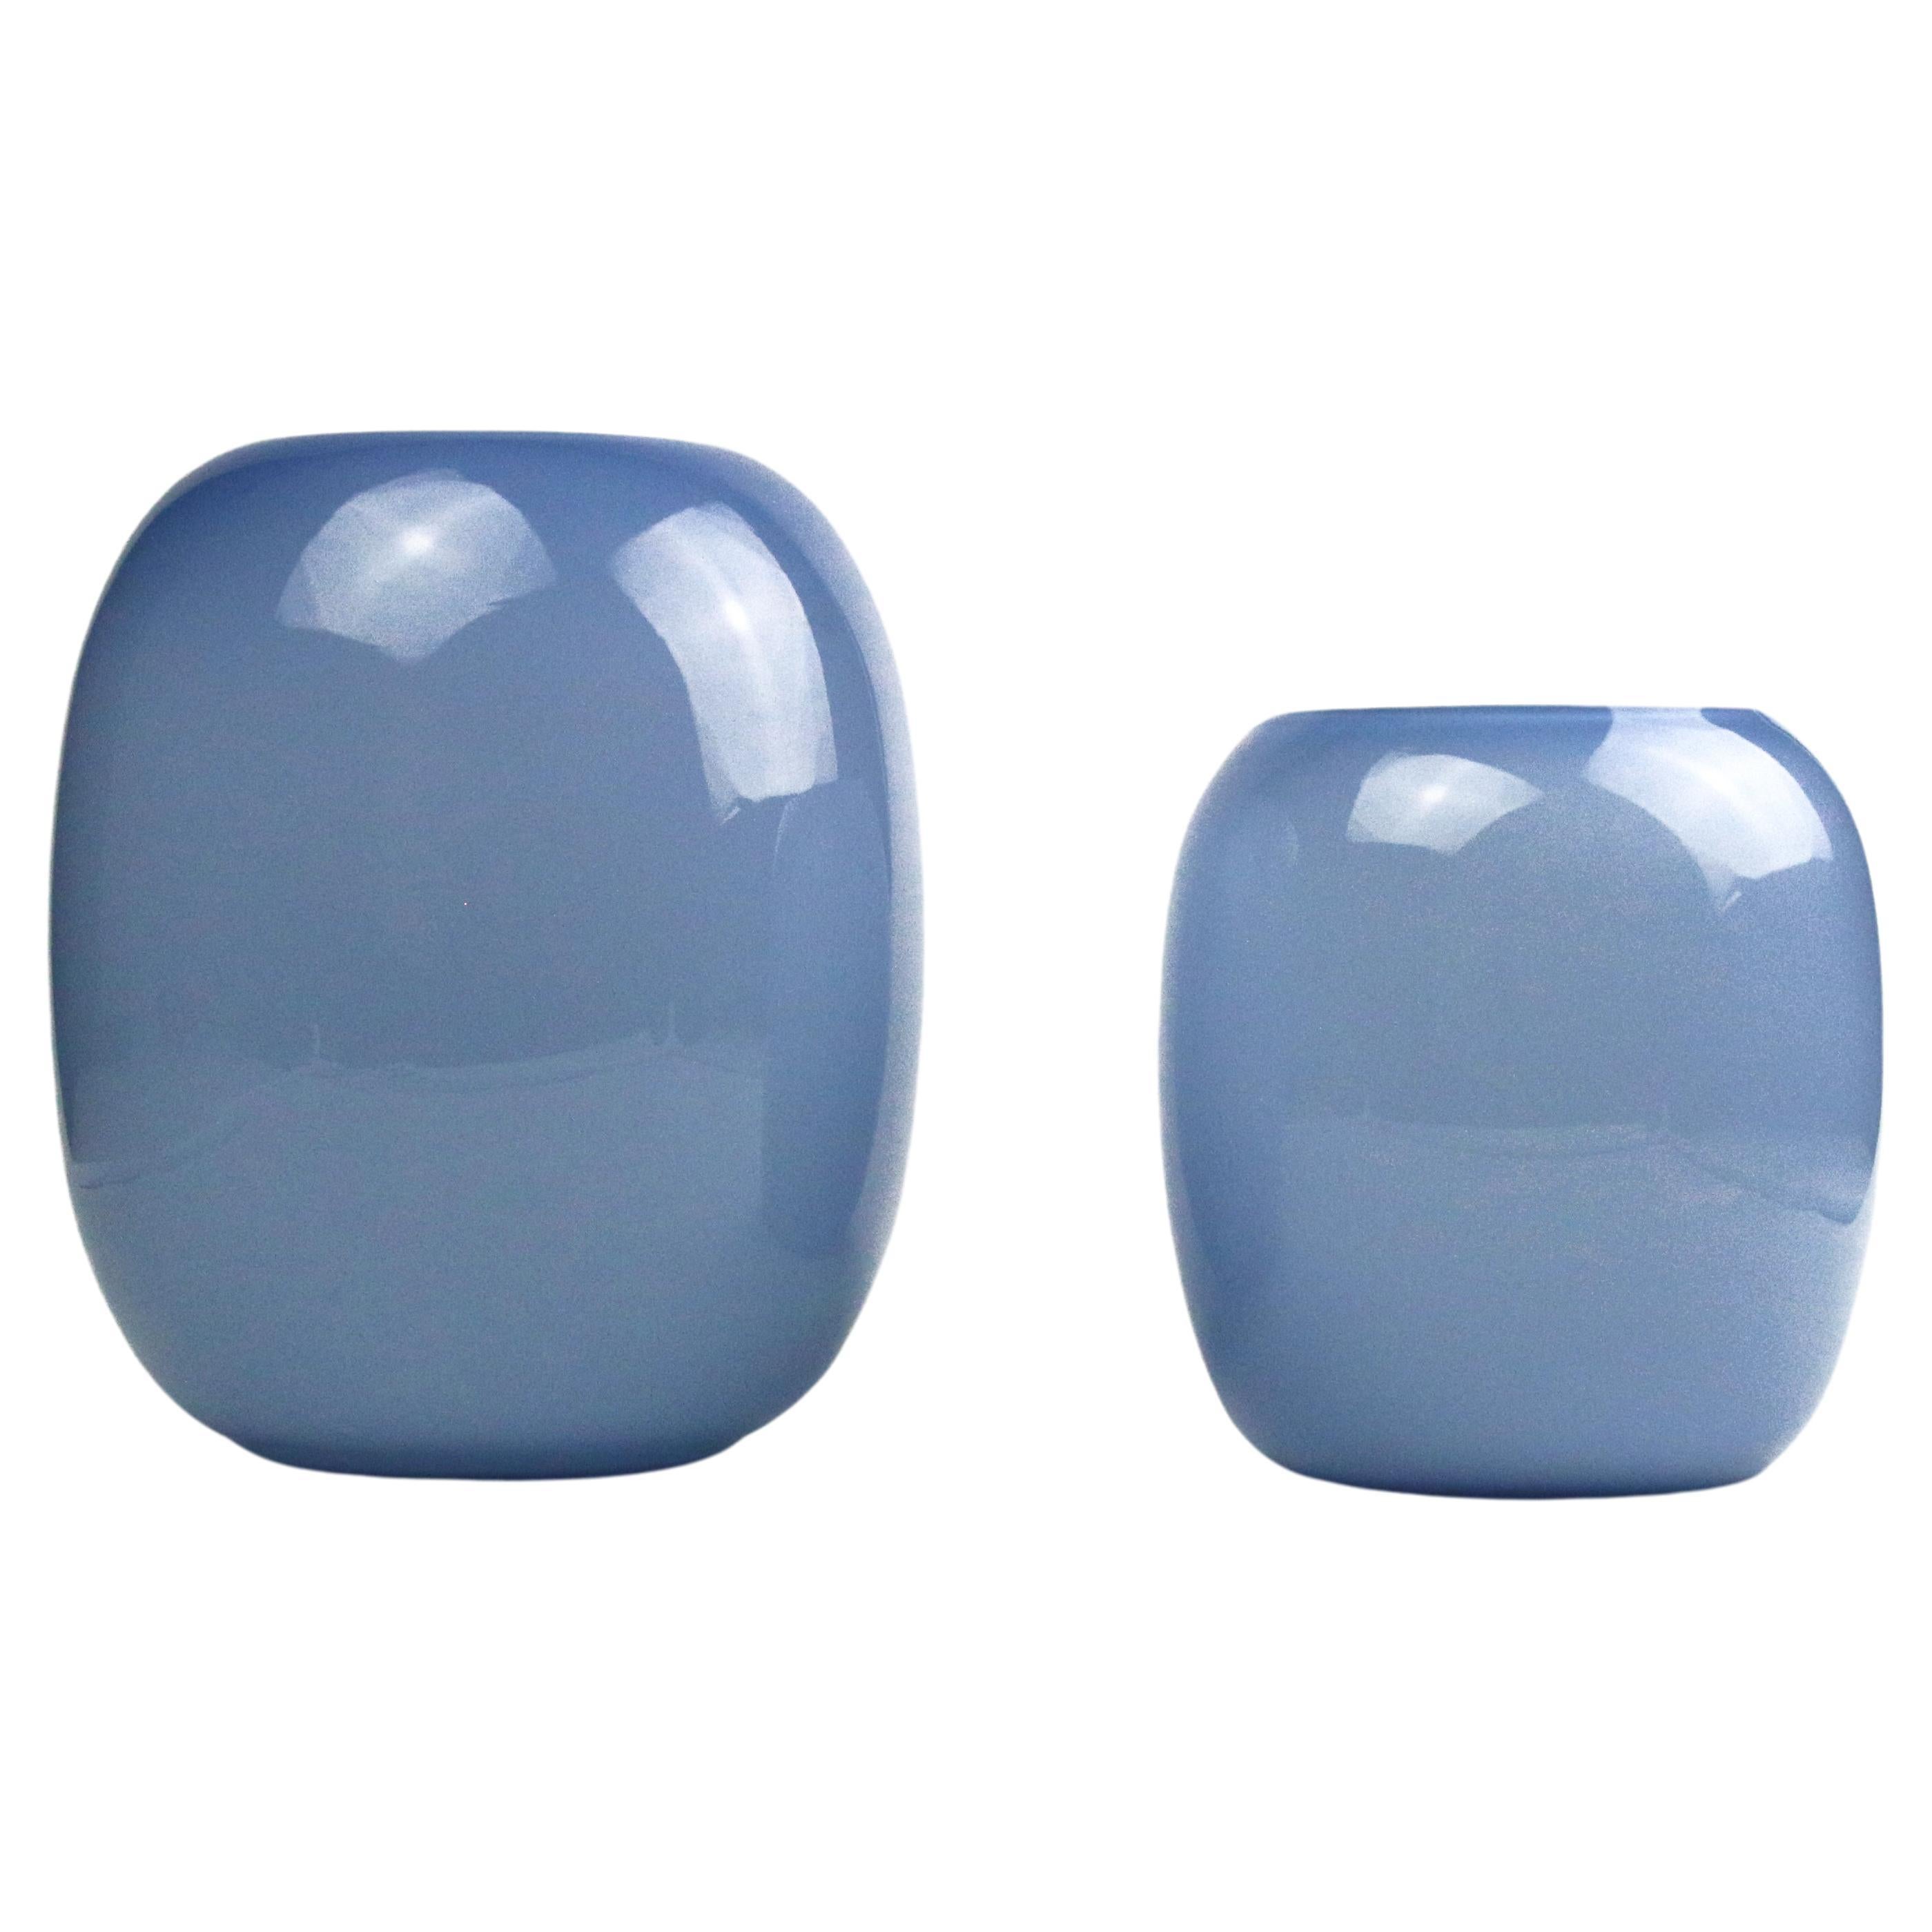 1295 Murano Art Blown Muranoglass Modified Cilinder Vases, Two Pieces Set For Sale